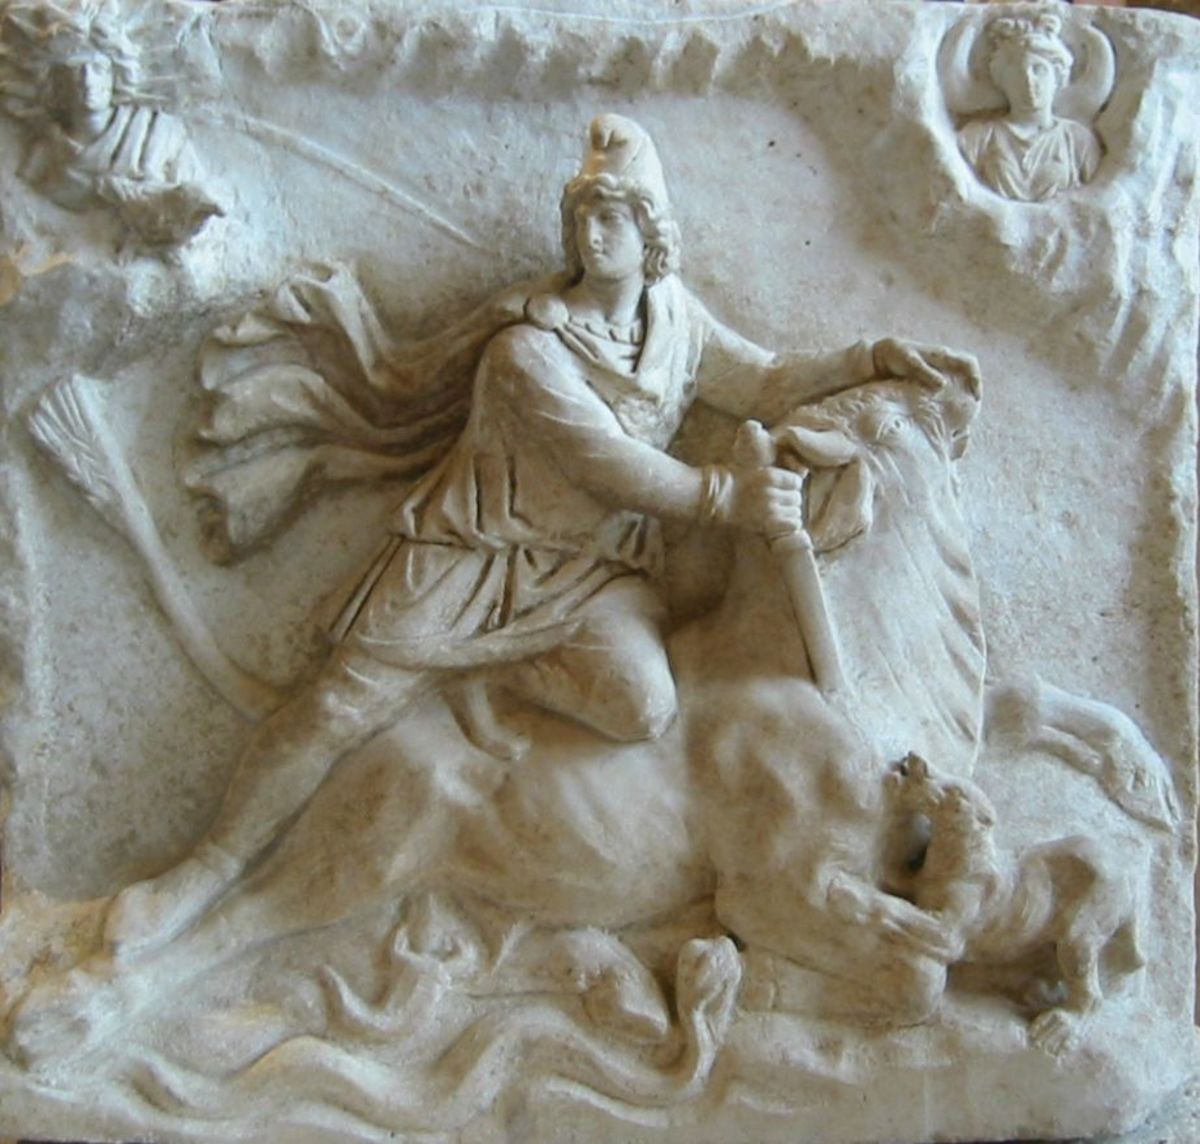 This Mithraic altarpiece found near Fiano Romano (close to Rome) shows Mithra slaying a bull. It is now housed in the Louvre.